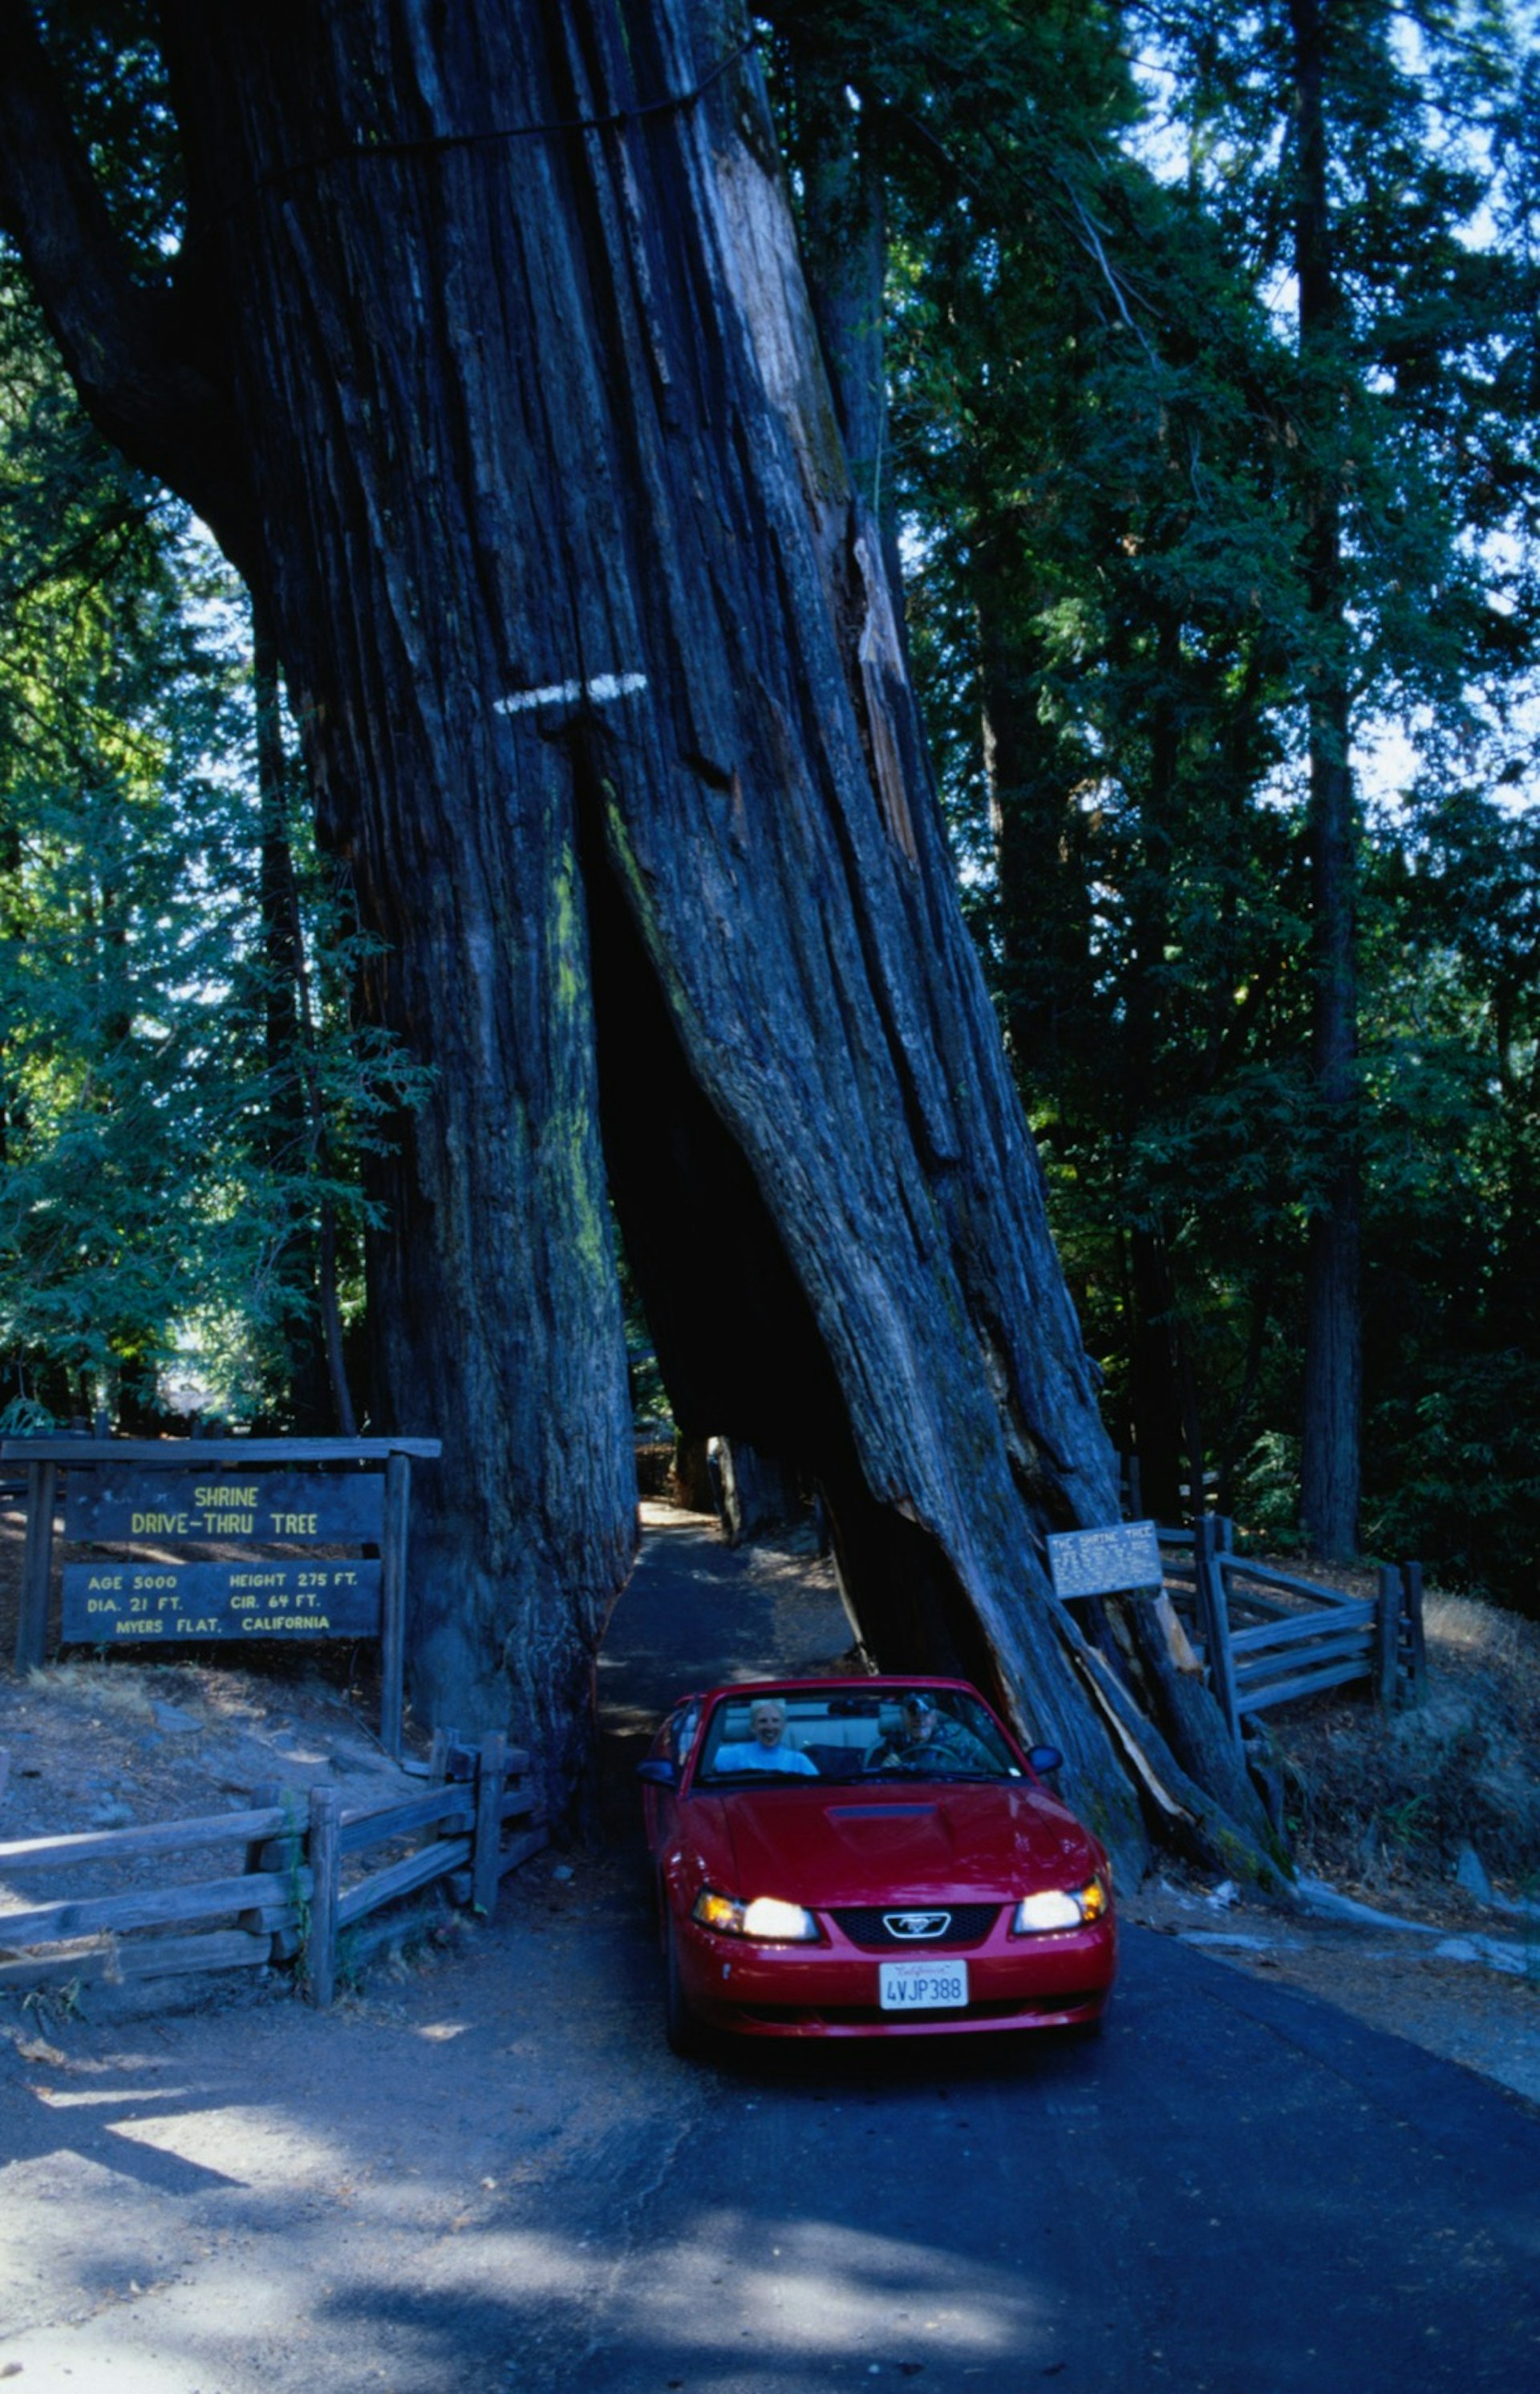 A car drives through Shiners drive thru tree on the Avenue of the Giants one amazing way to experience California's redwoods